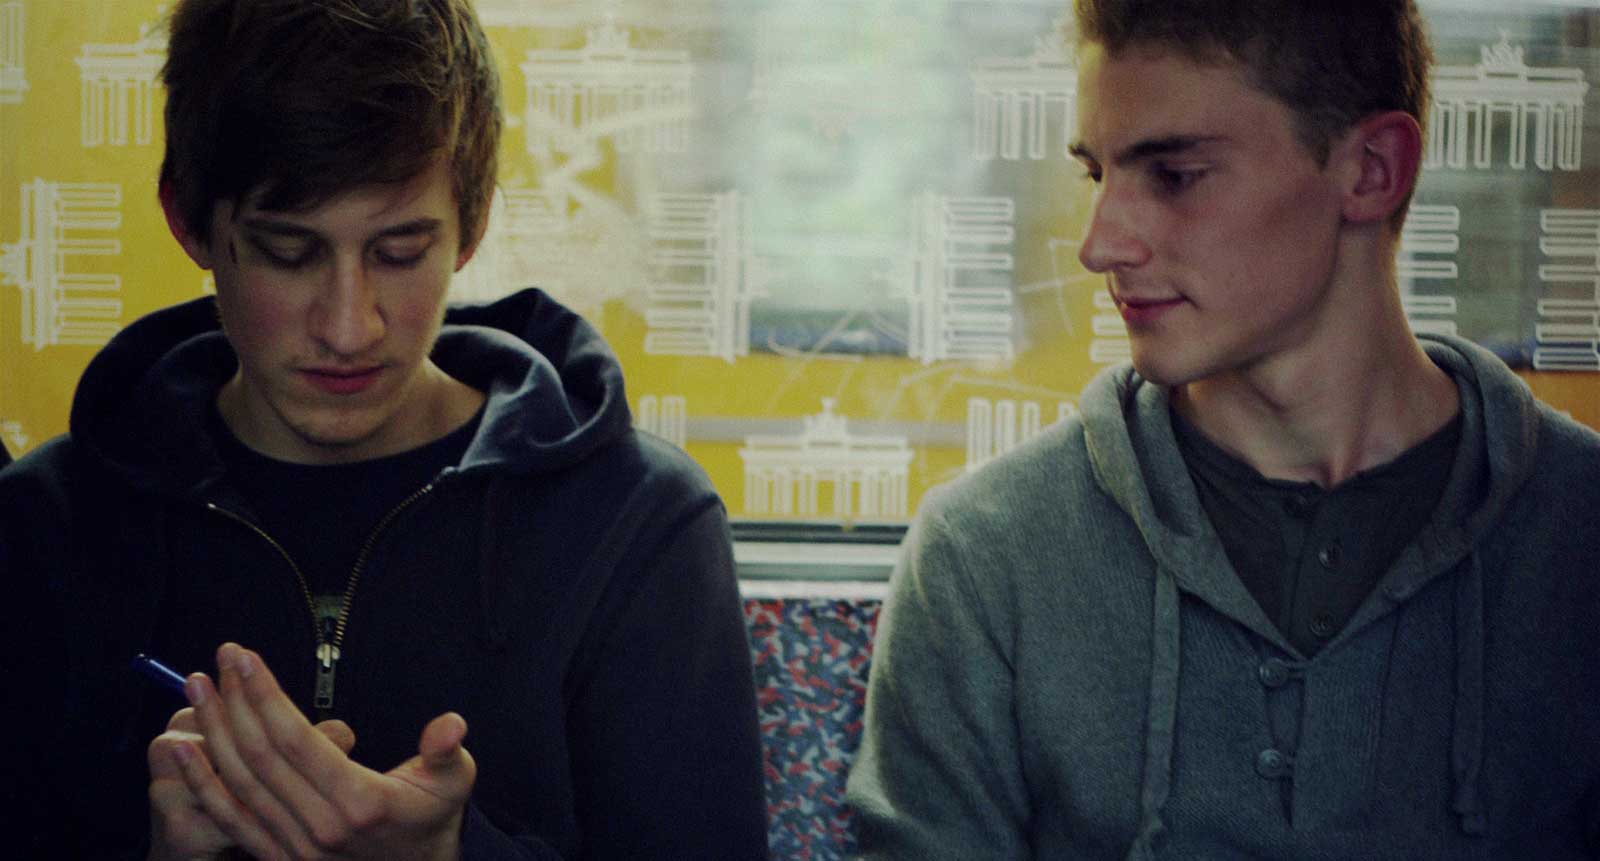 Still of Josef Mattes and Martin Bruchmann in Silent Youth (2012)